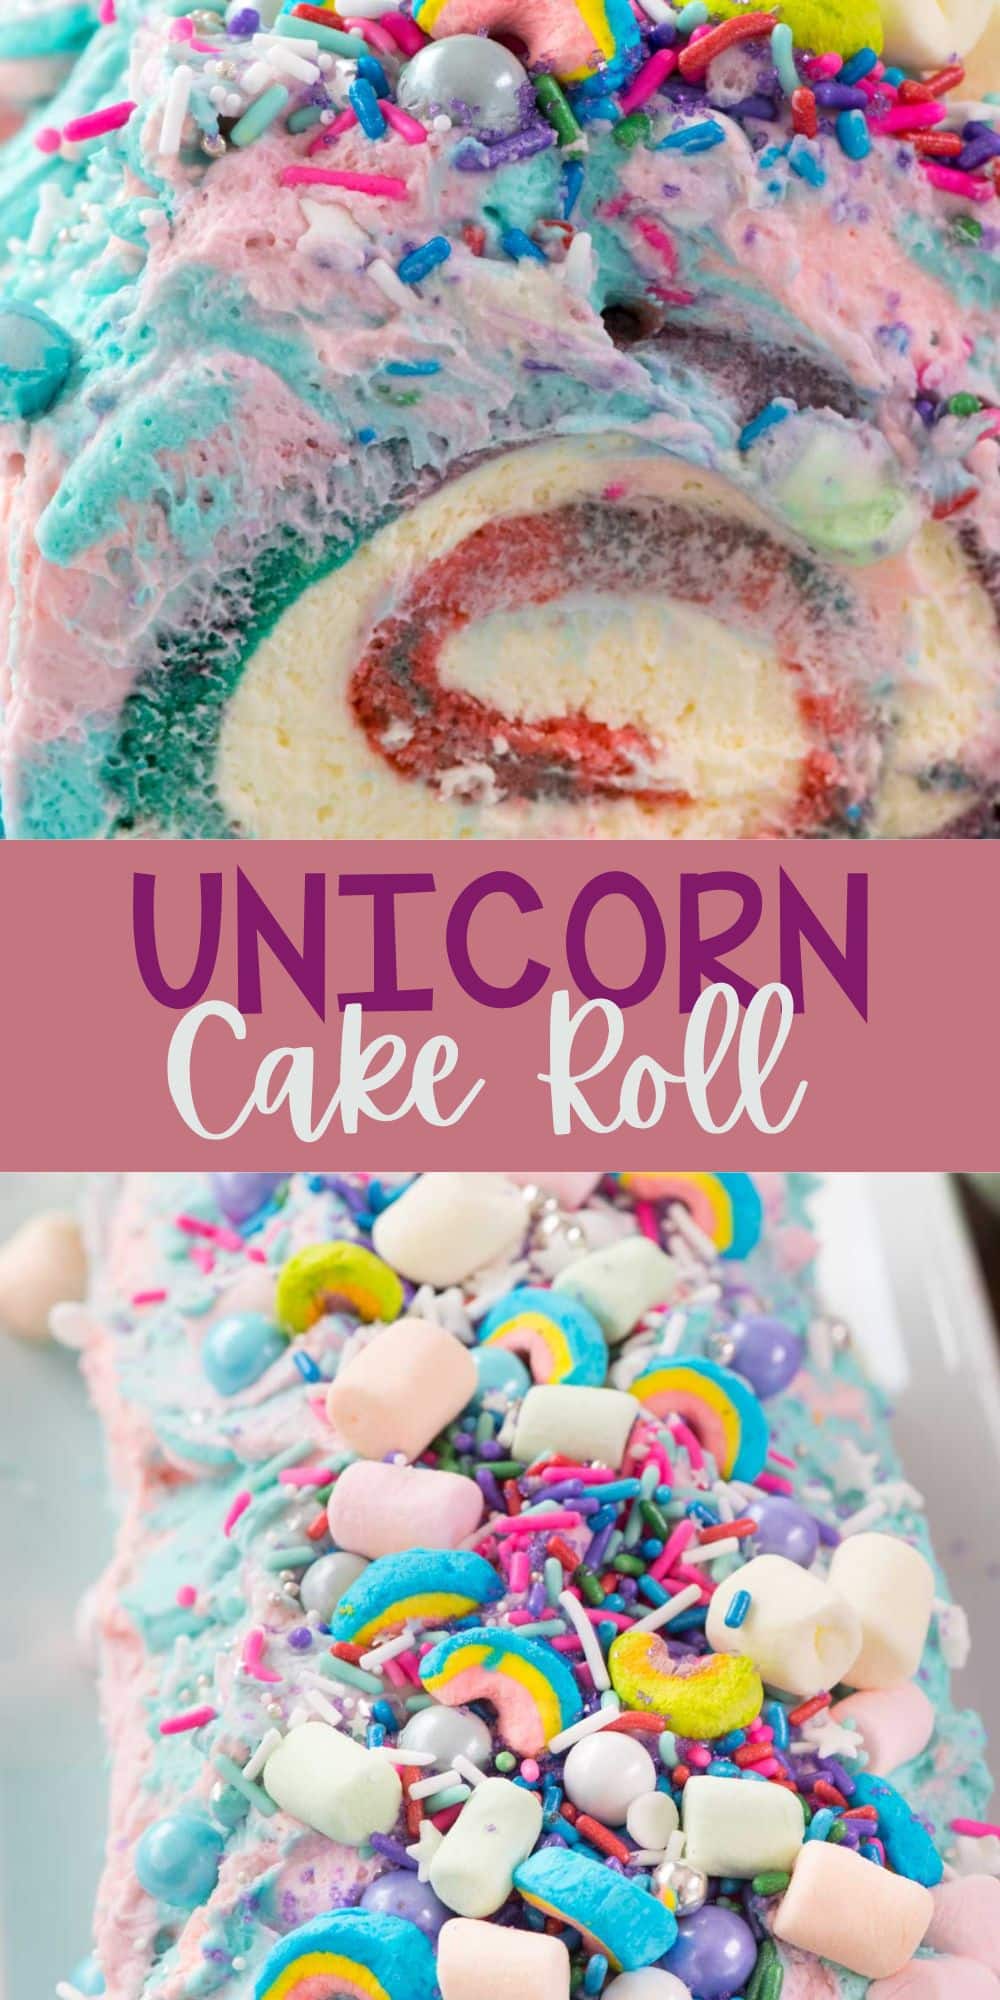 two photos of colorful cake roll covered in tie-dye frosting and colorful cereal with words on the image.